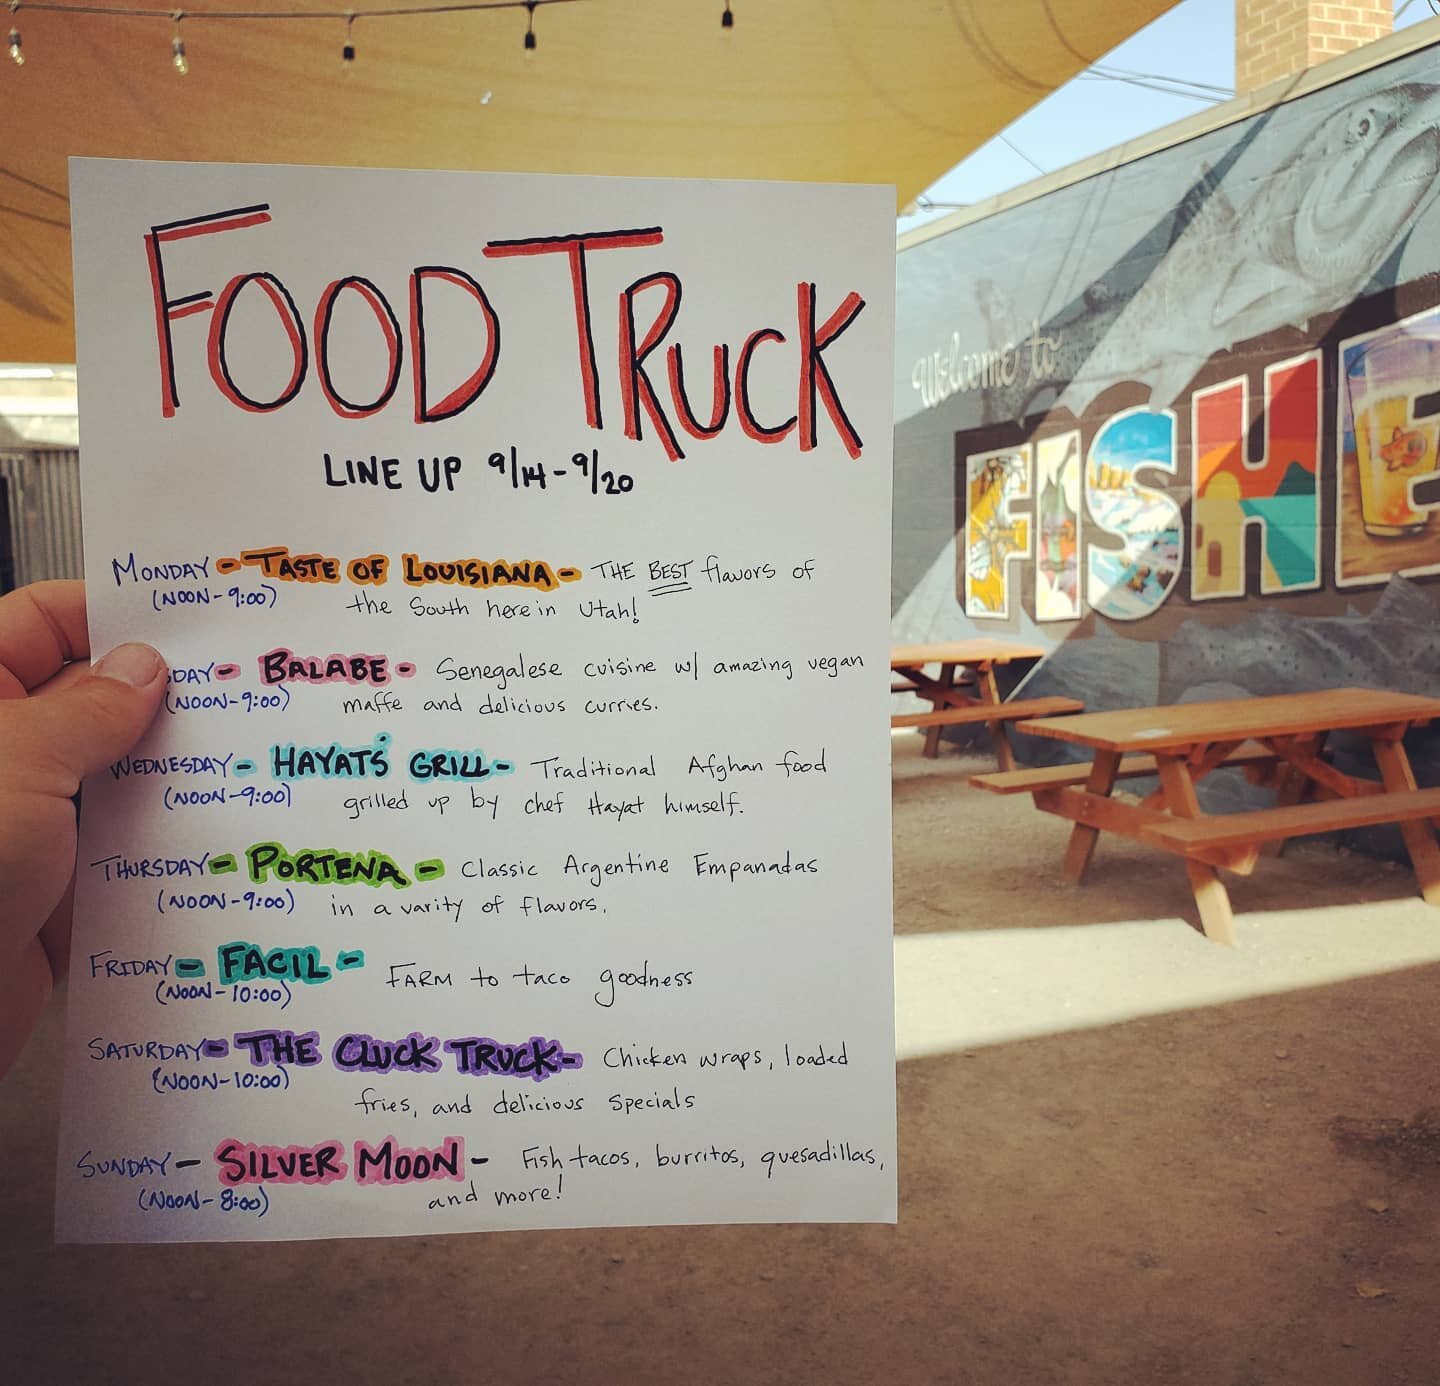 Happy Monday Fisher fans.  This week's food truck line up is packed with variety!  Look for the return of the Fisher Cerveza, Idaho Connection, a West Coast IPA, and hopefully the BEET SAISON this week 🤞  #foodtrucks #fisherbrewing #varietyisthespic